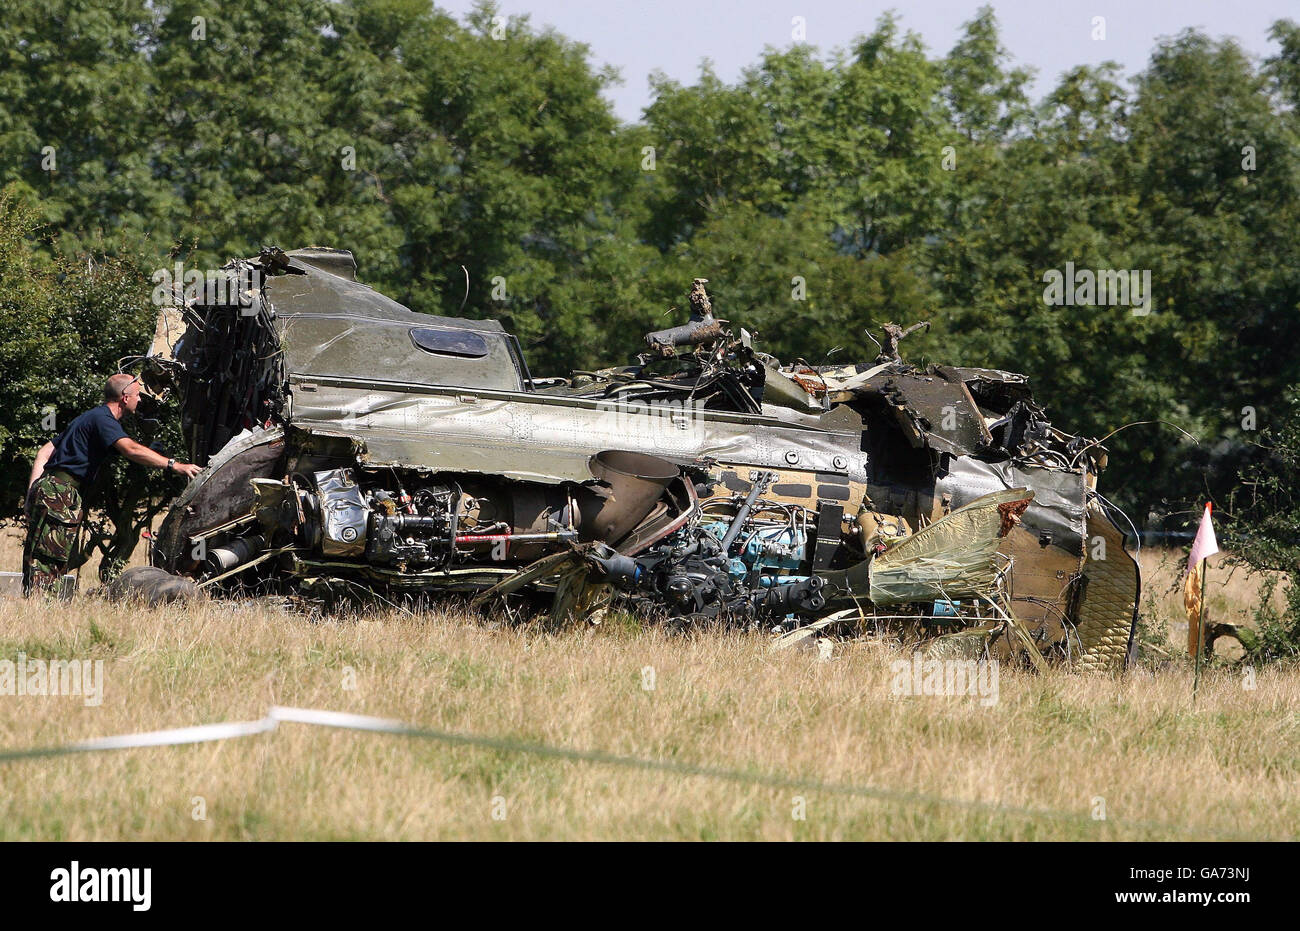 Military personnel at the scene where a RAF puma helicopter crashed on MoD  land last night killing 2 people, near Catterick, North Yorkshire Stock  Photo - Alamy